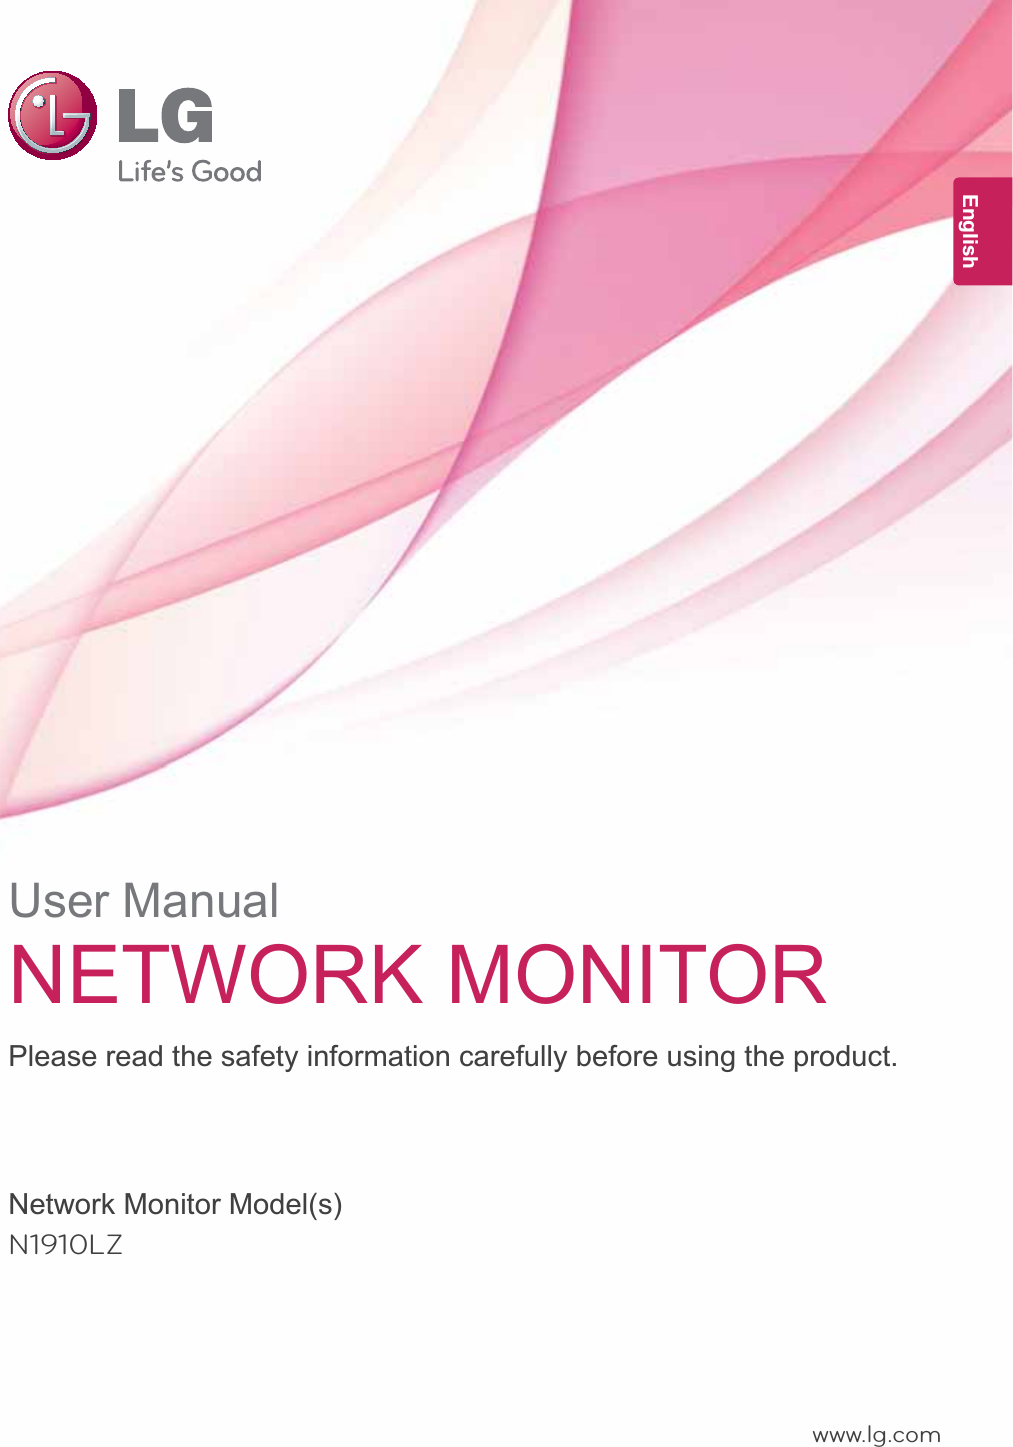 www.lg.comUser ManualNETWORK MONITORN1910LZPlease read the safety information carefully before using the product.Network Monitor Model(s)English